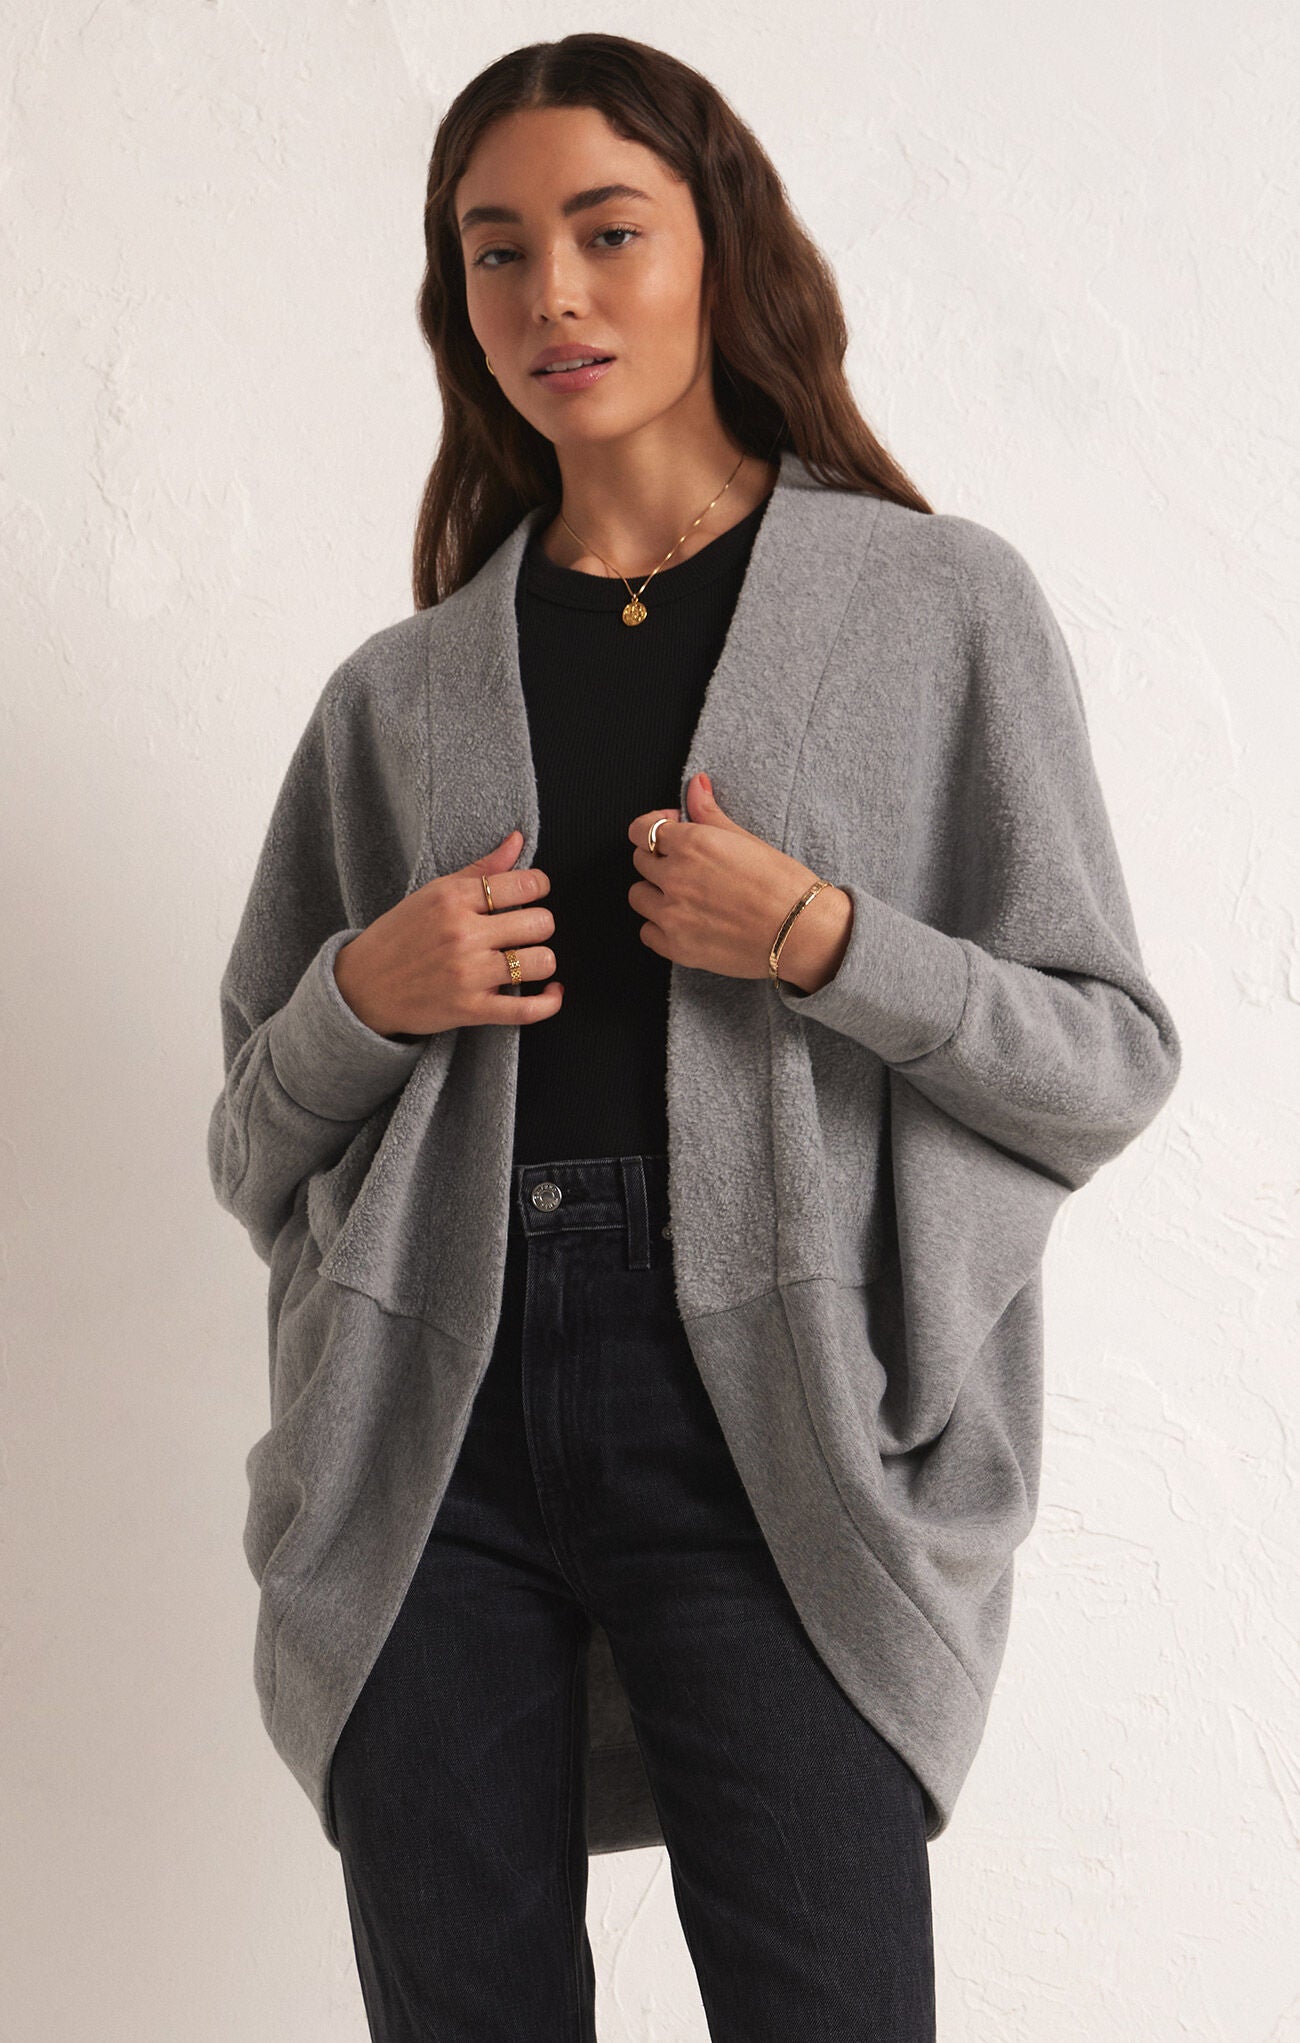 Commuter Fleece Cardigan-Cardigans-Vixen Collection, Day Spa and Women's Boutique Located in Seattle, Washington